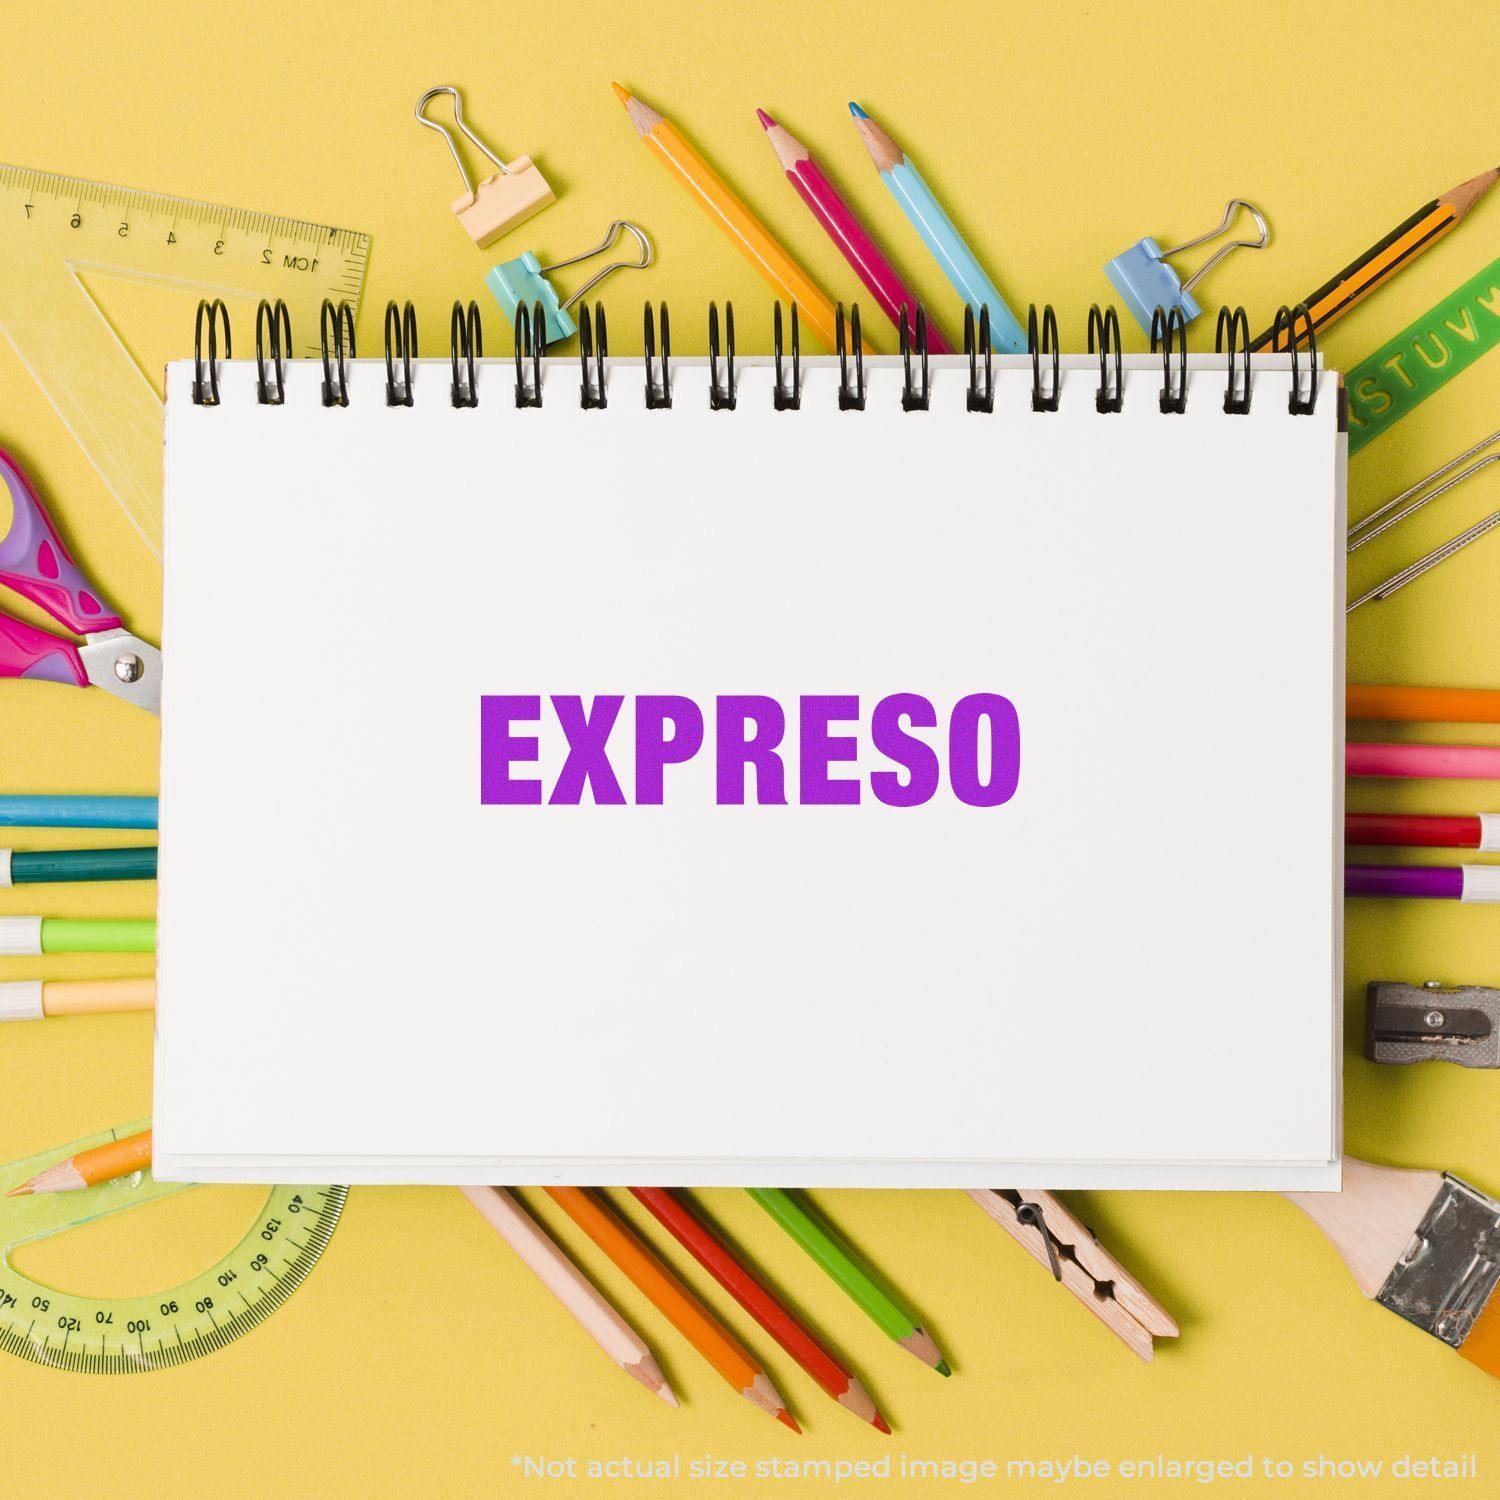 A stock office pre-inked stamp with a stamped image showing how the text "EXPRESO" is displayed after stamping.